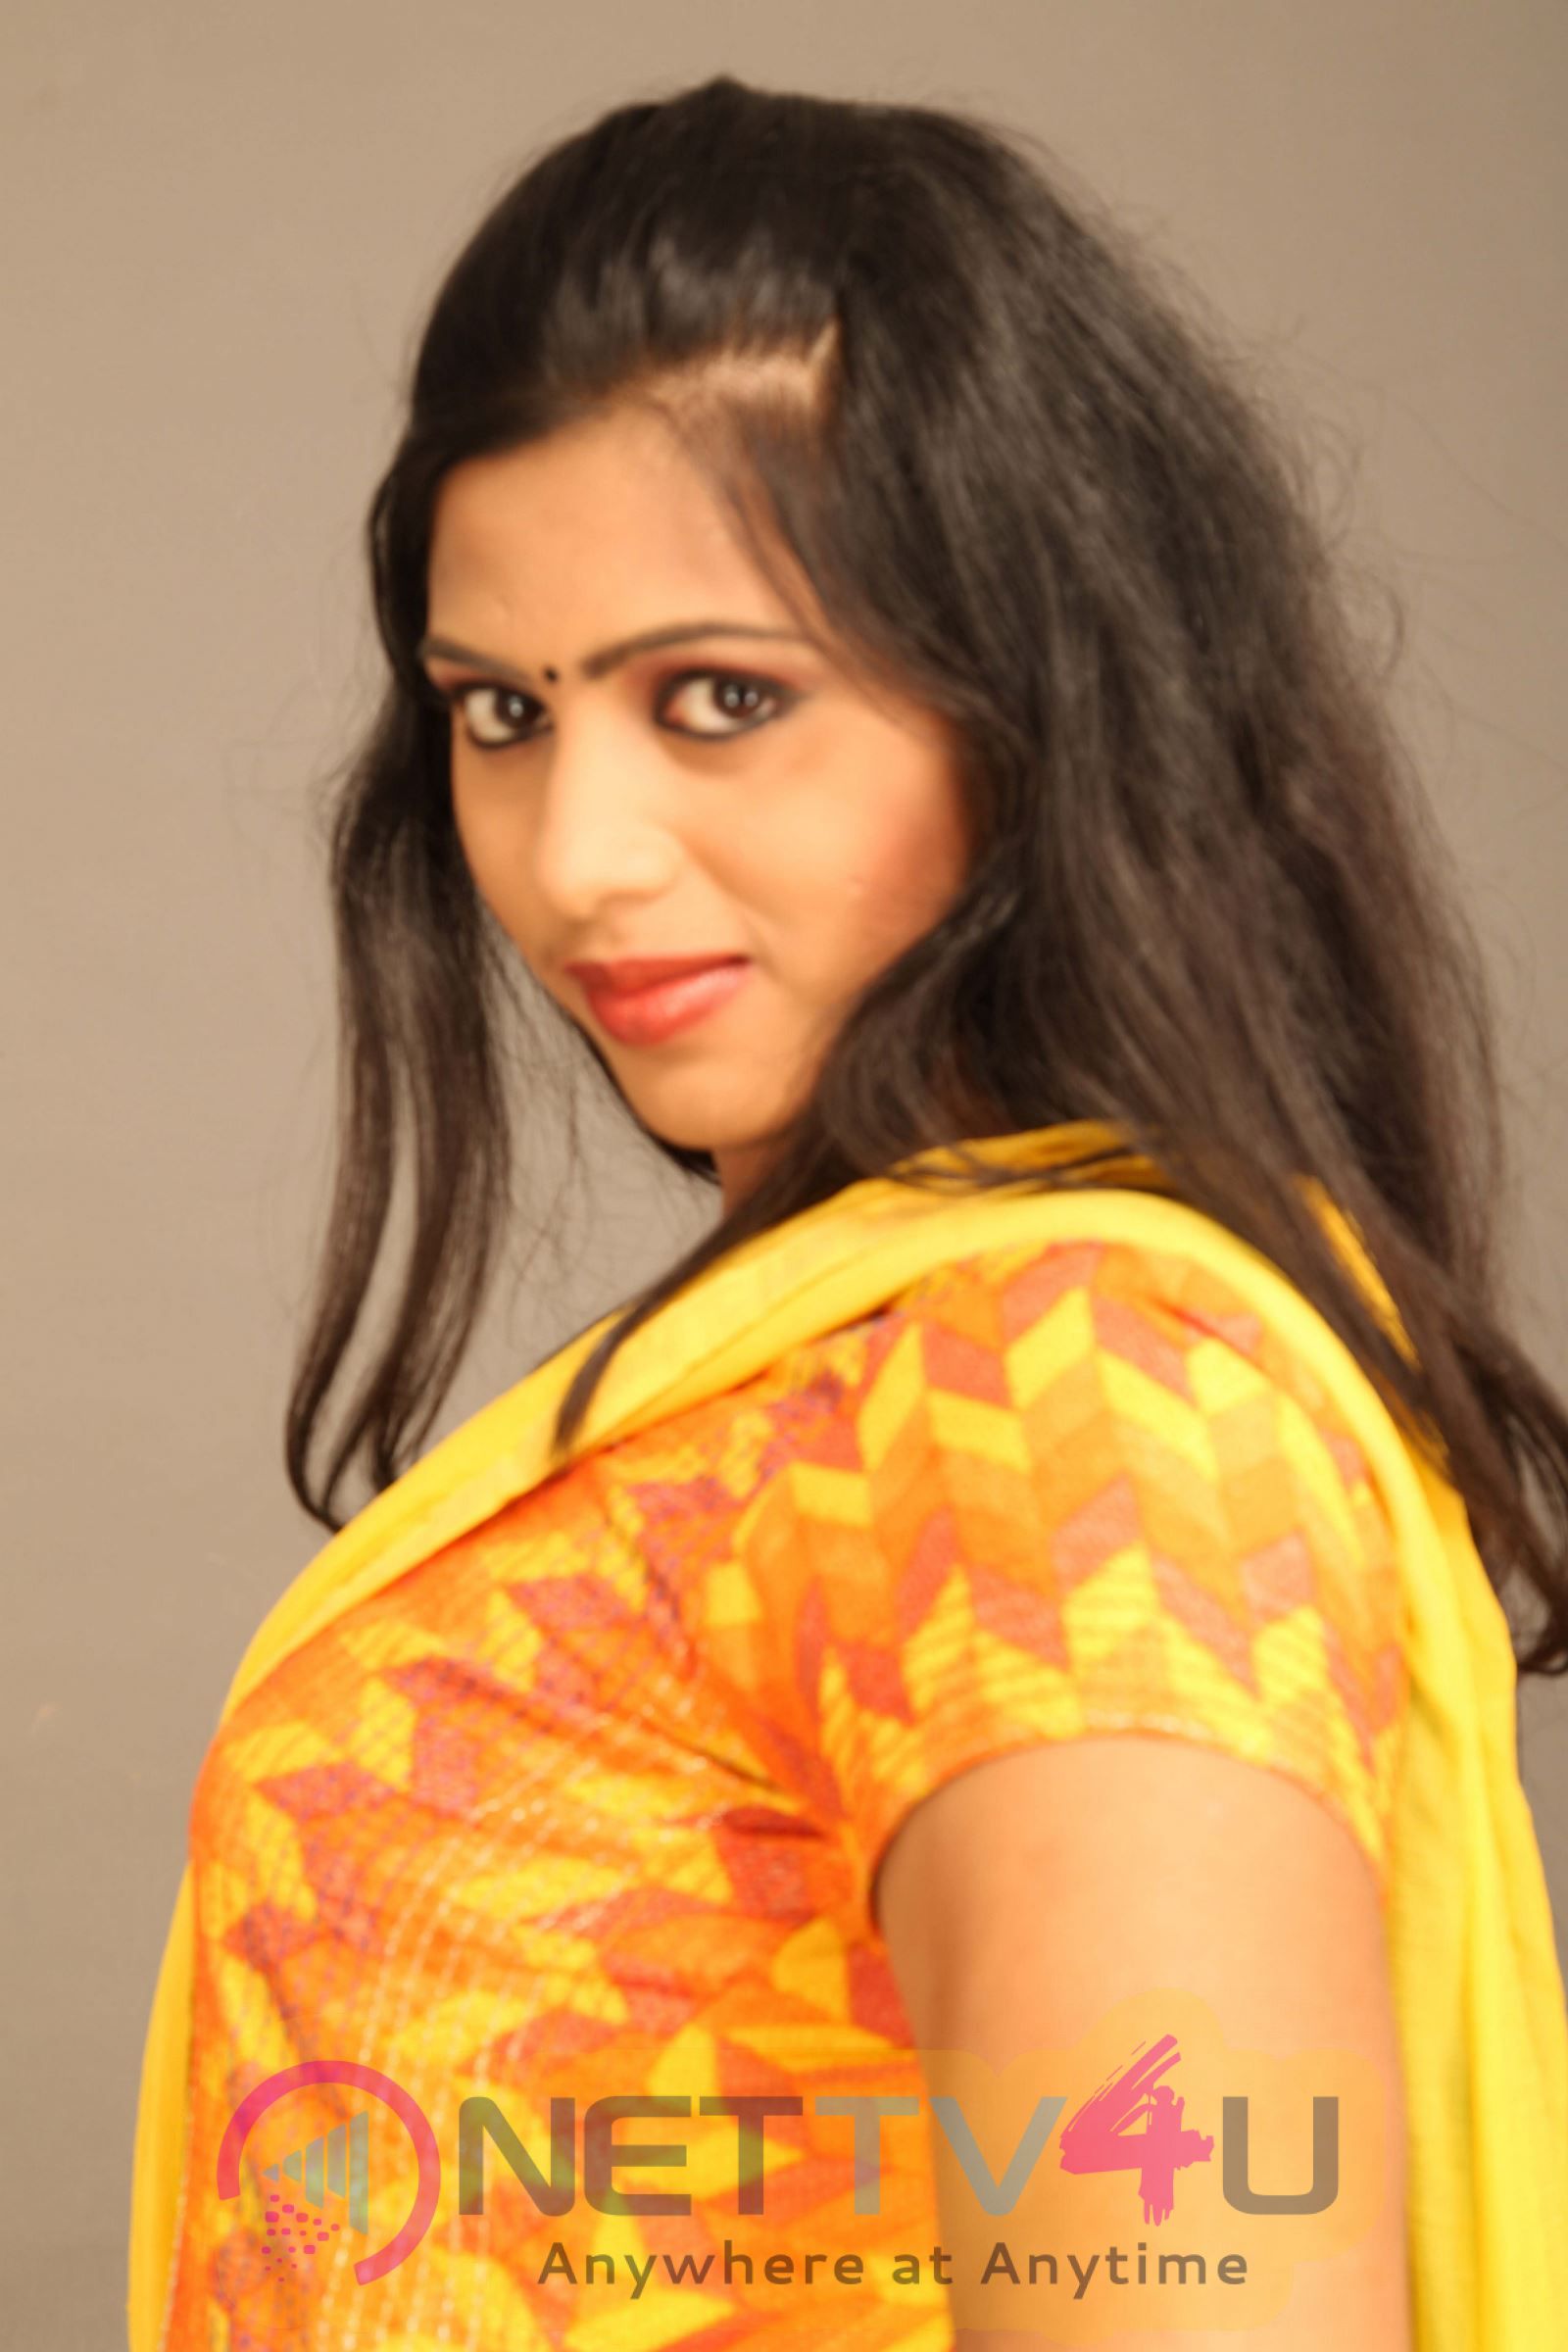 Jaga Tamil Movie Attractive Stills And Cute Posters Tamil Gallery